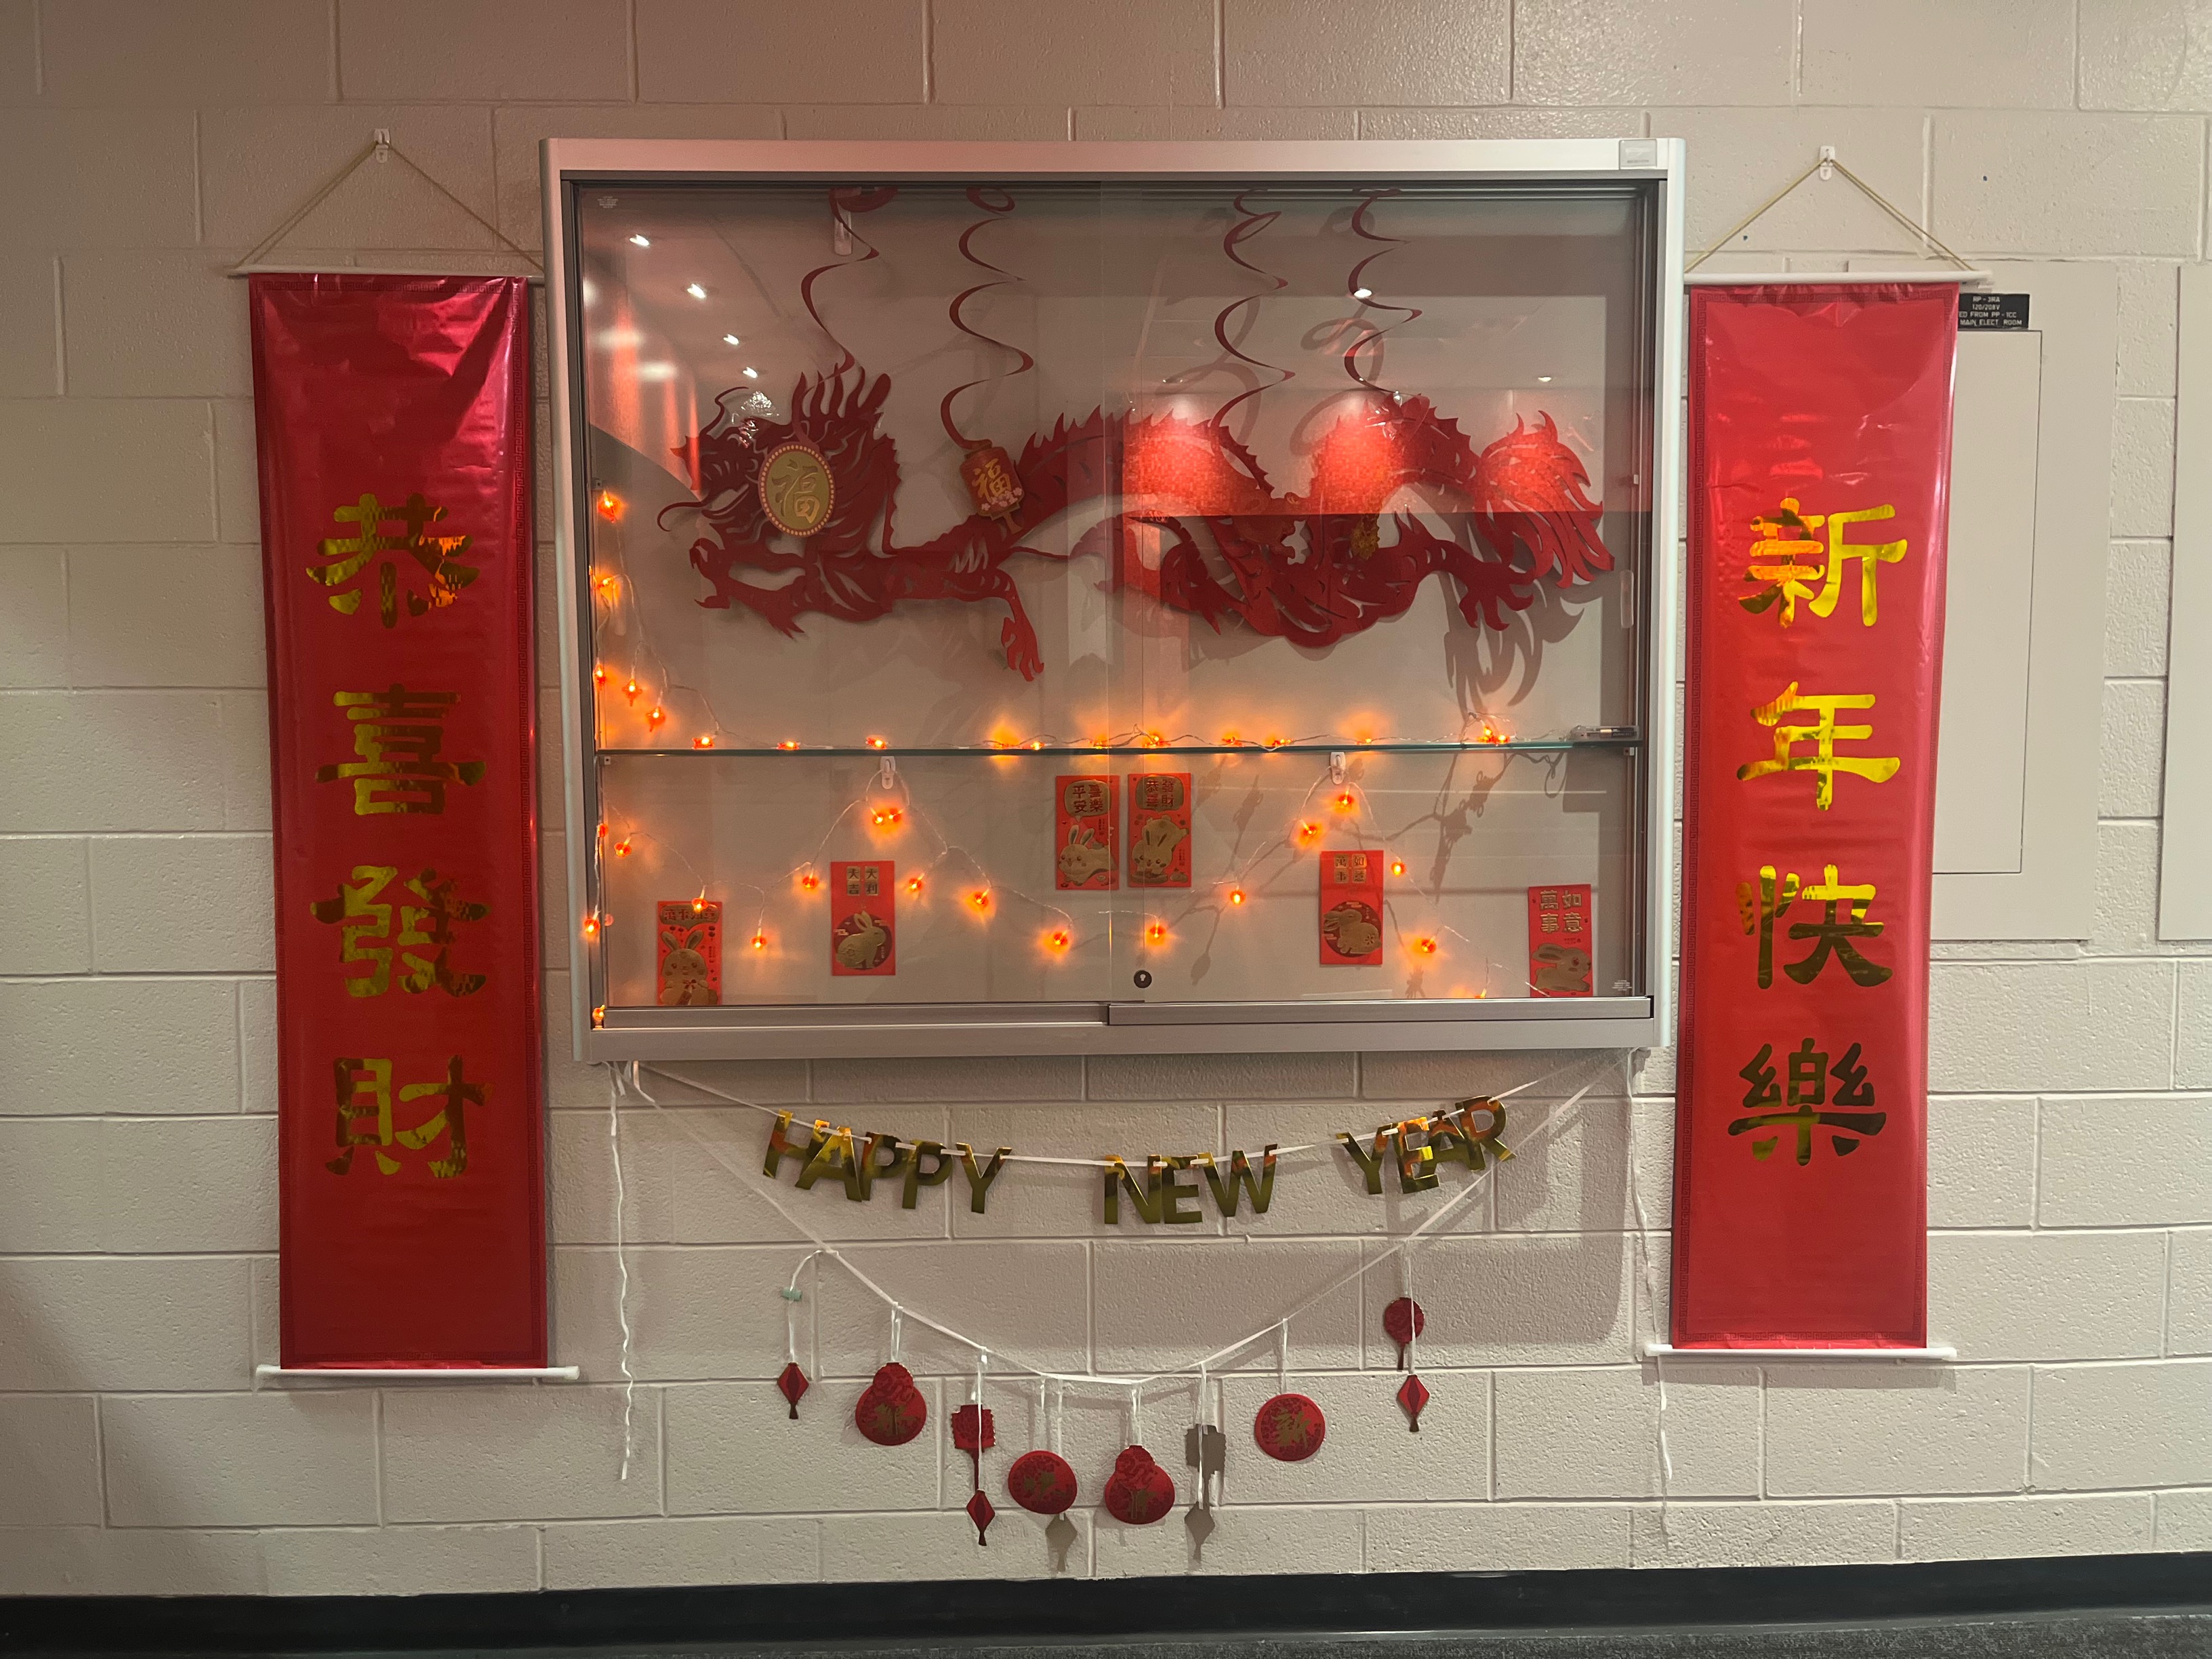 Lunar new year decorations behind a glass case on a wall